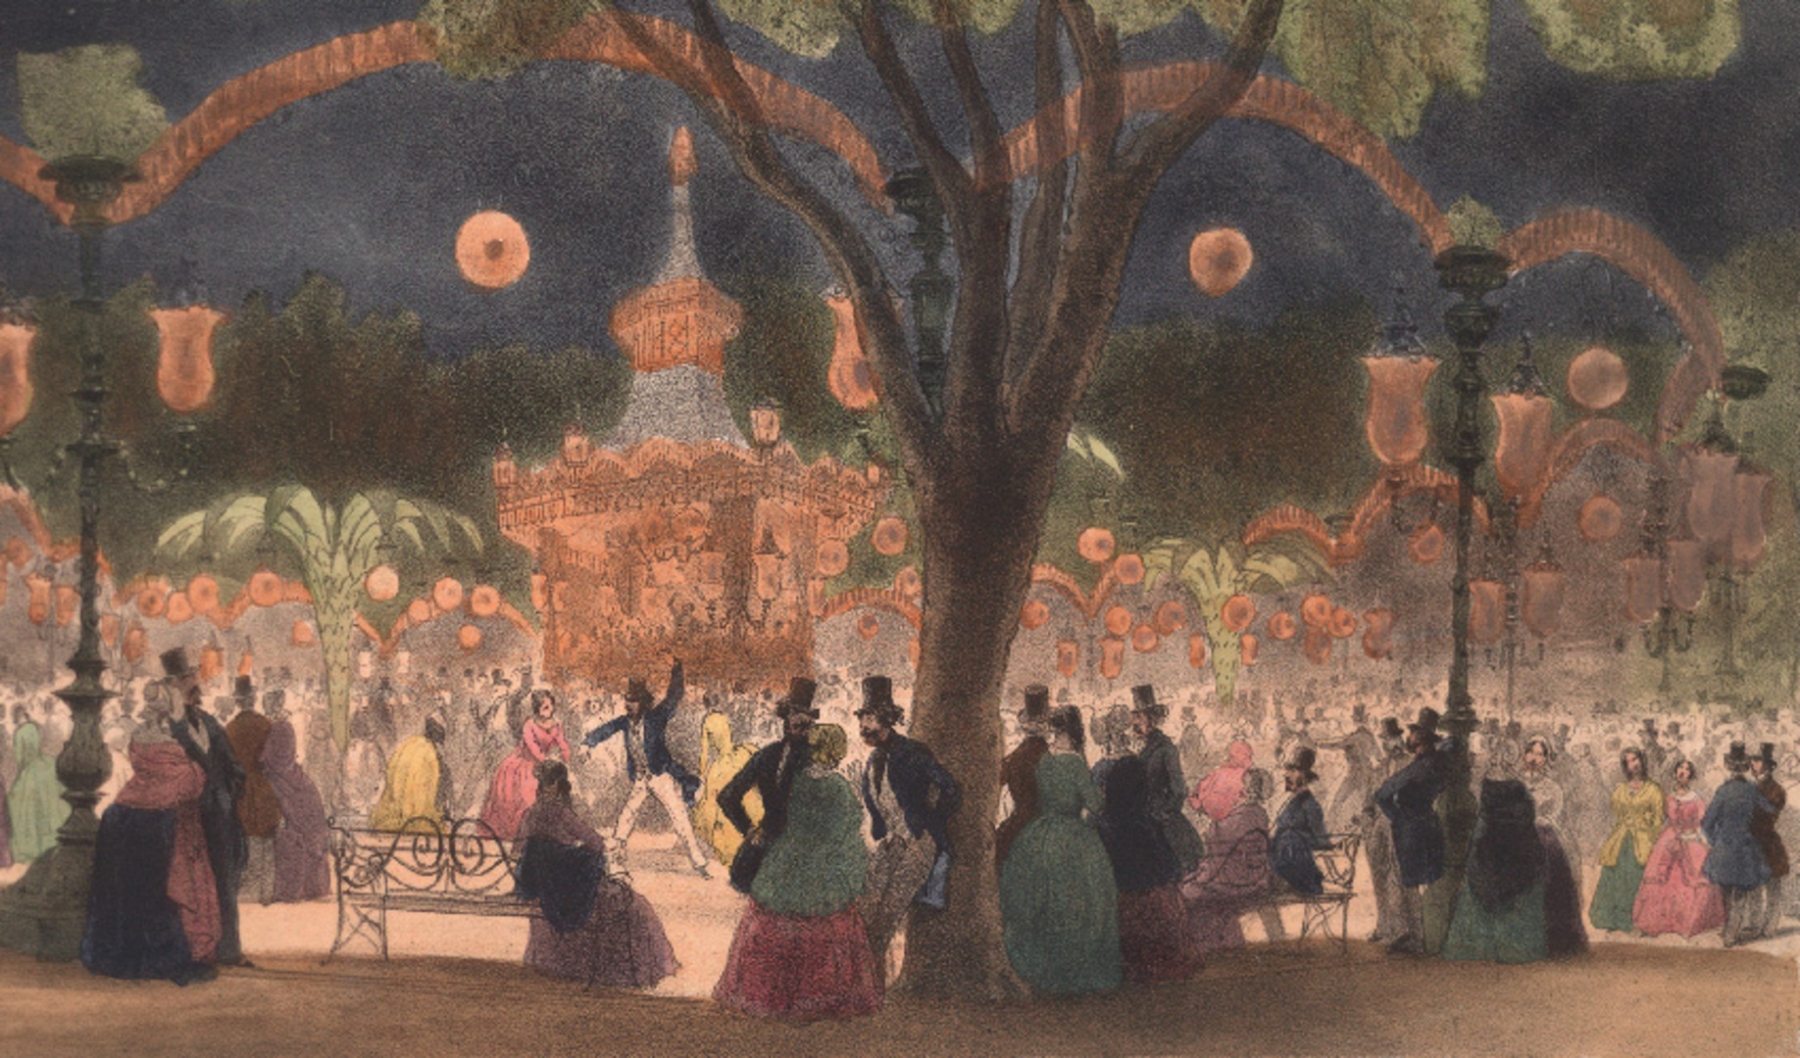 A Victorian Fete and Pleasure Ground